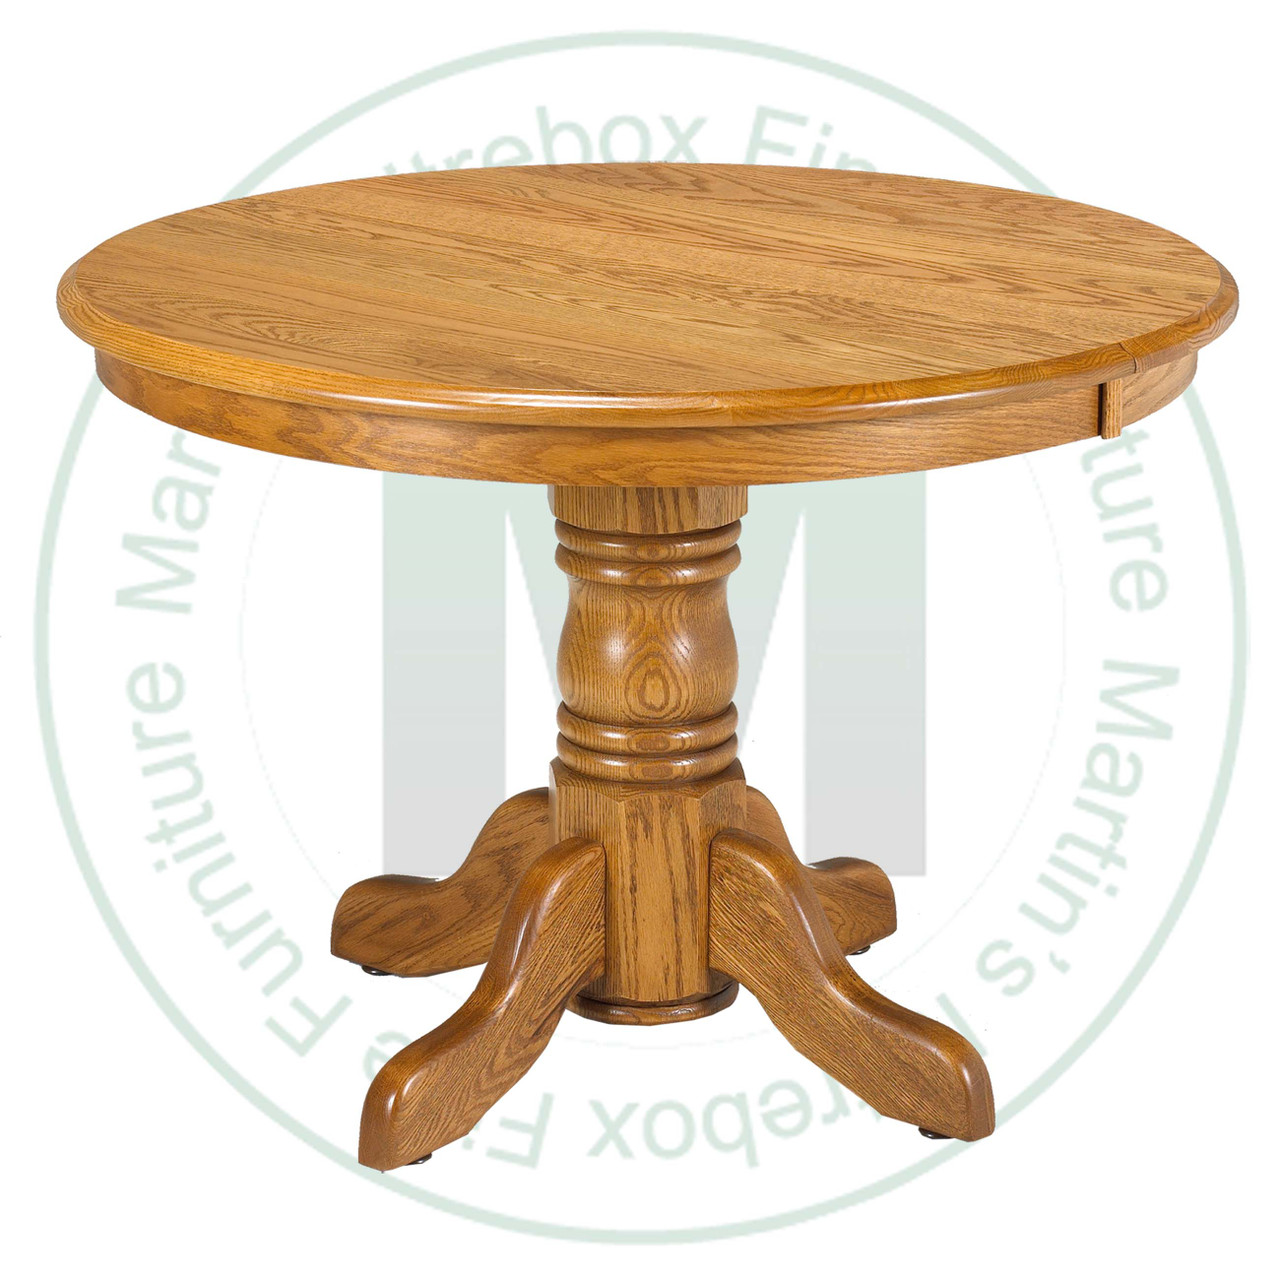 Wormy Maple Lancaster Collection Single Pedestal Table 42''D x 42''W x 30''H Round Solid Table. Table Has 1'' Thick Top